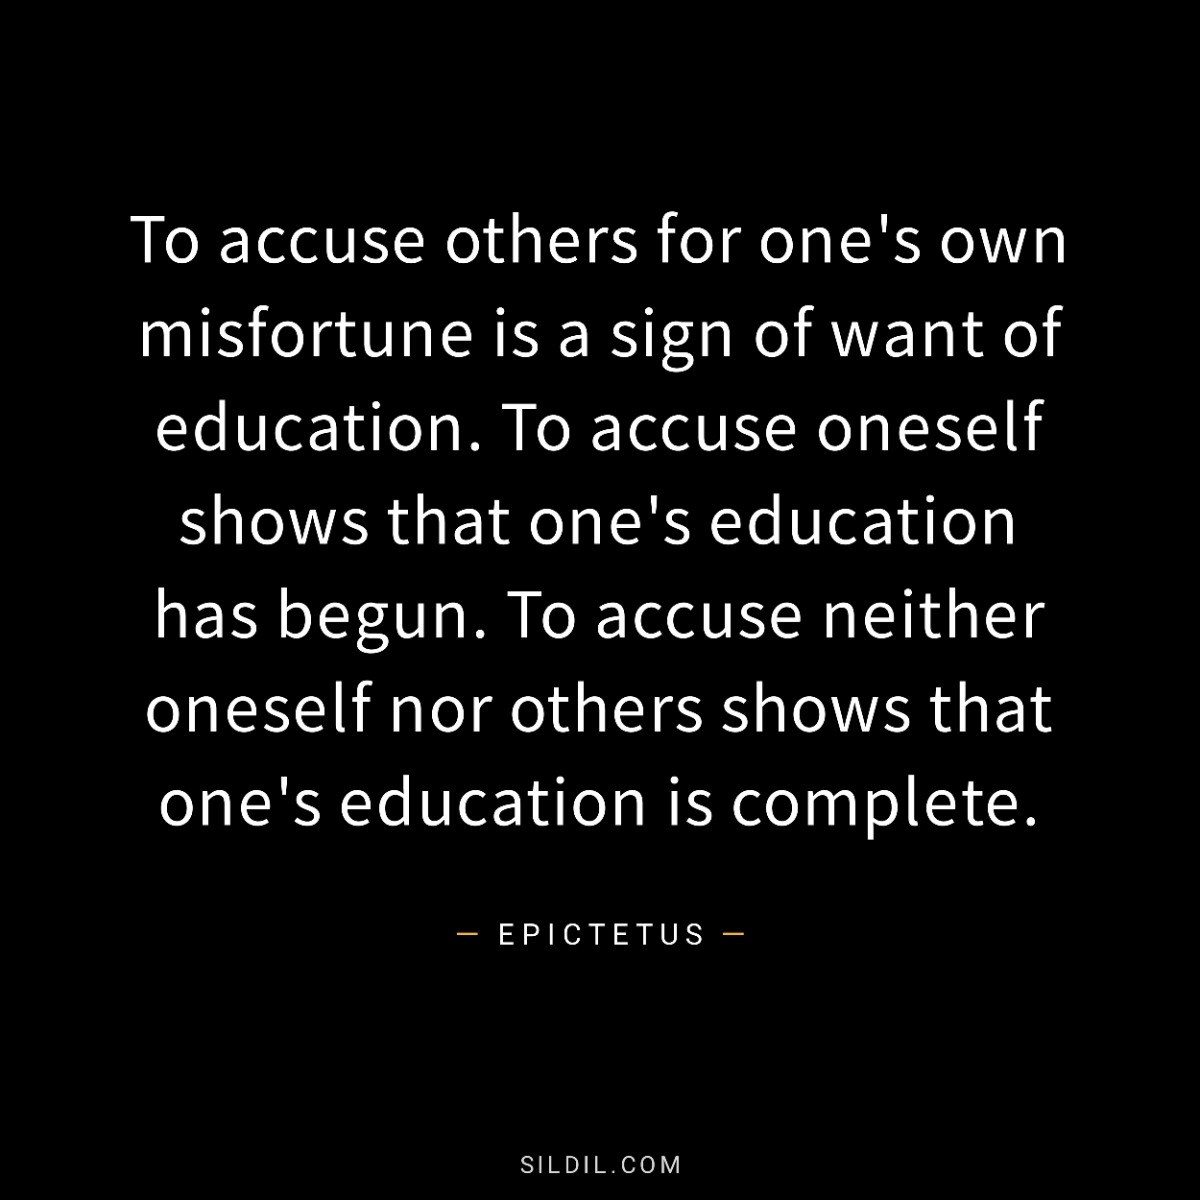 To accuse others for one's own misfortune is a sign of want of education. To accuse oneself shows that one's education has begun. To accuse neither oneself nor others shows that one's education is complete.